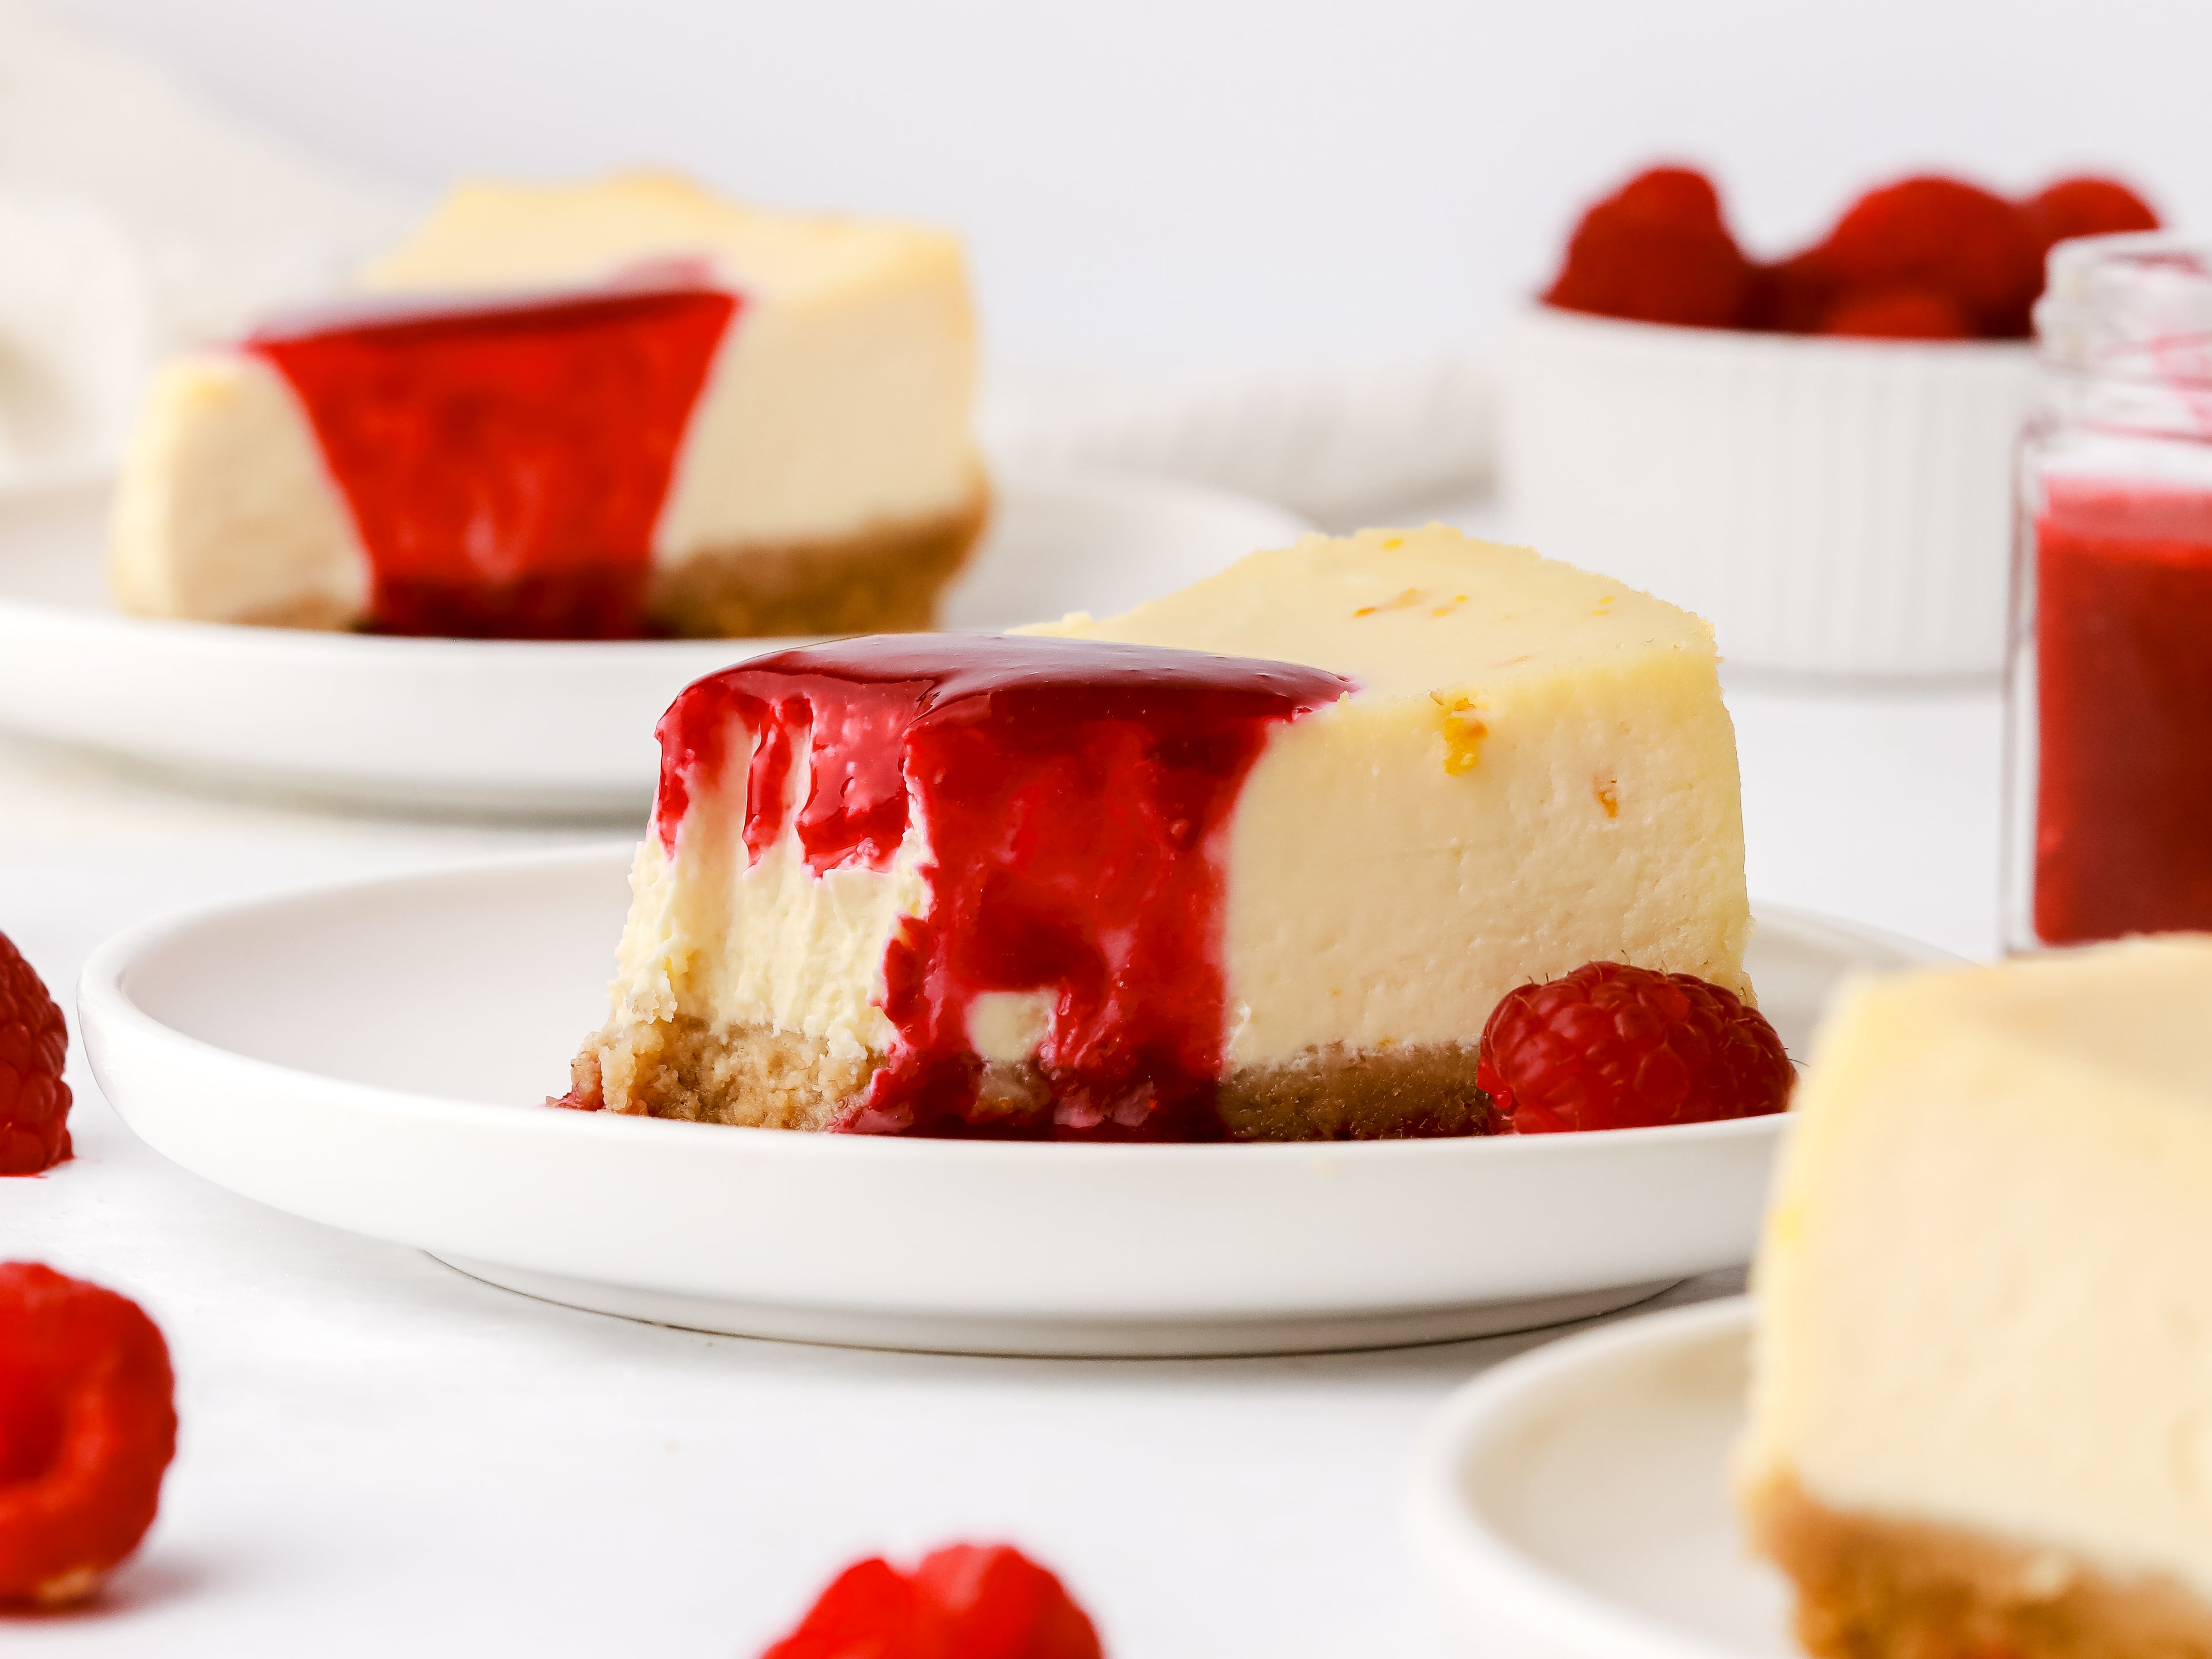 Slice of cheesecake with raspberry coulis on top